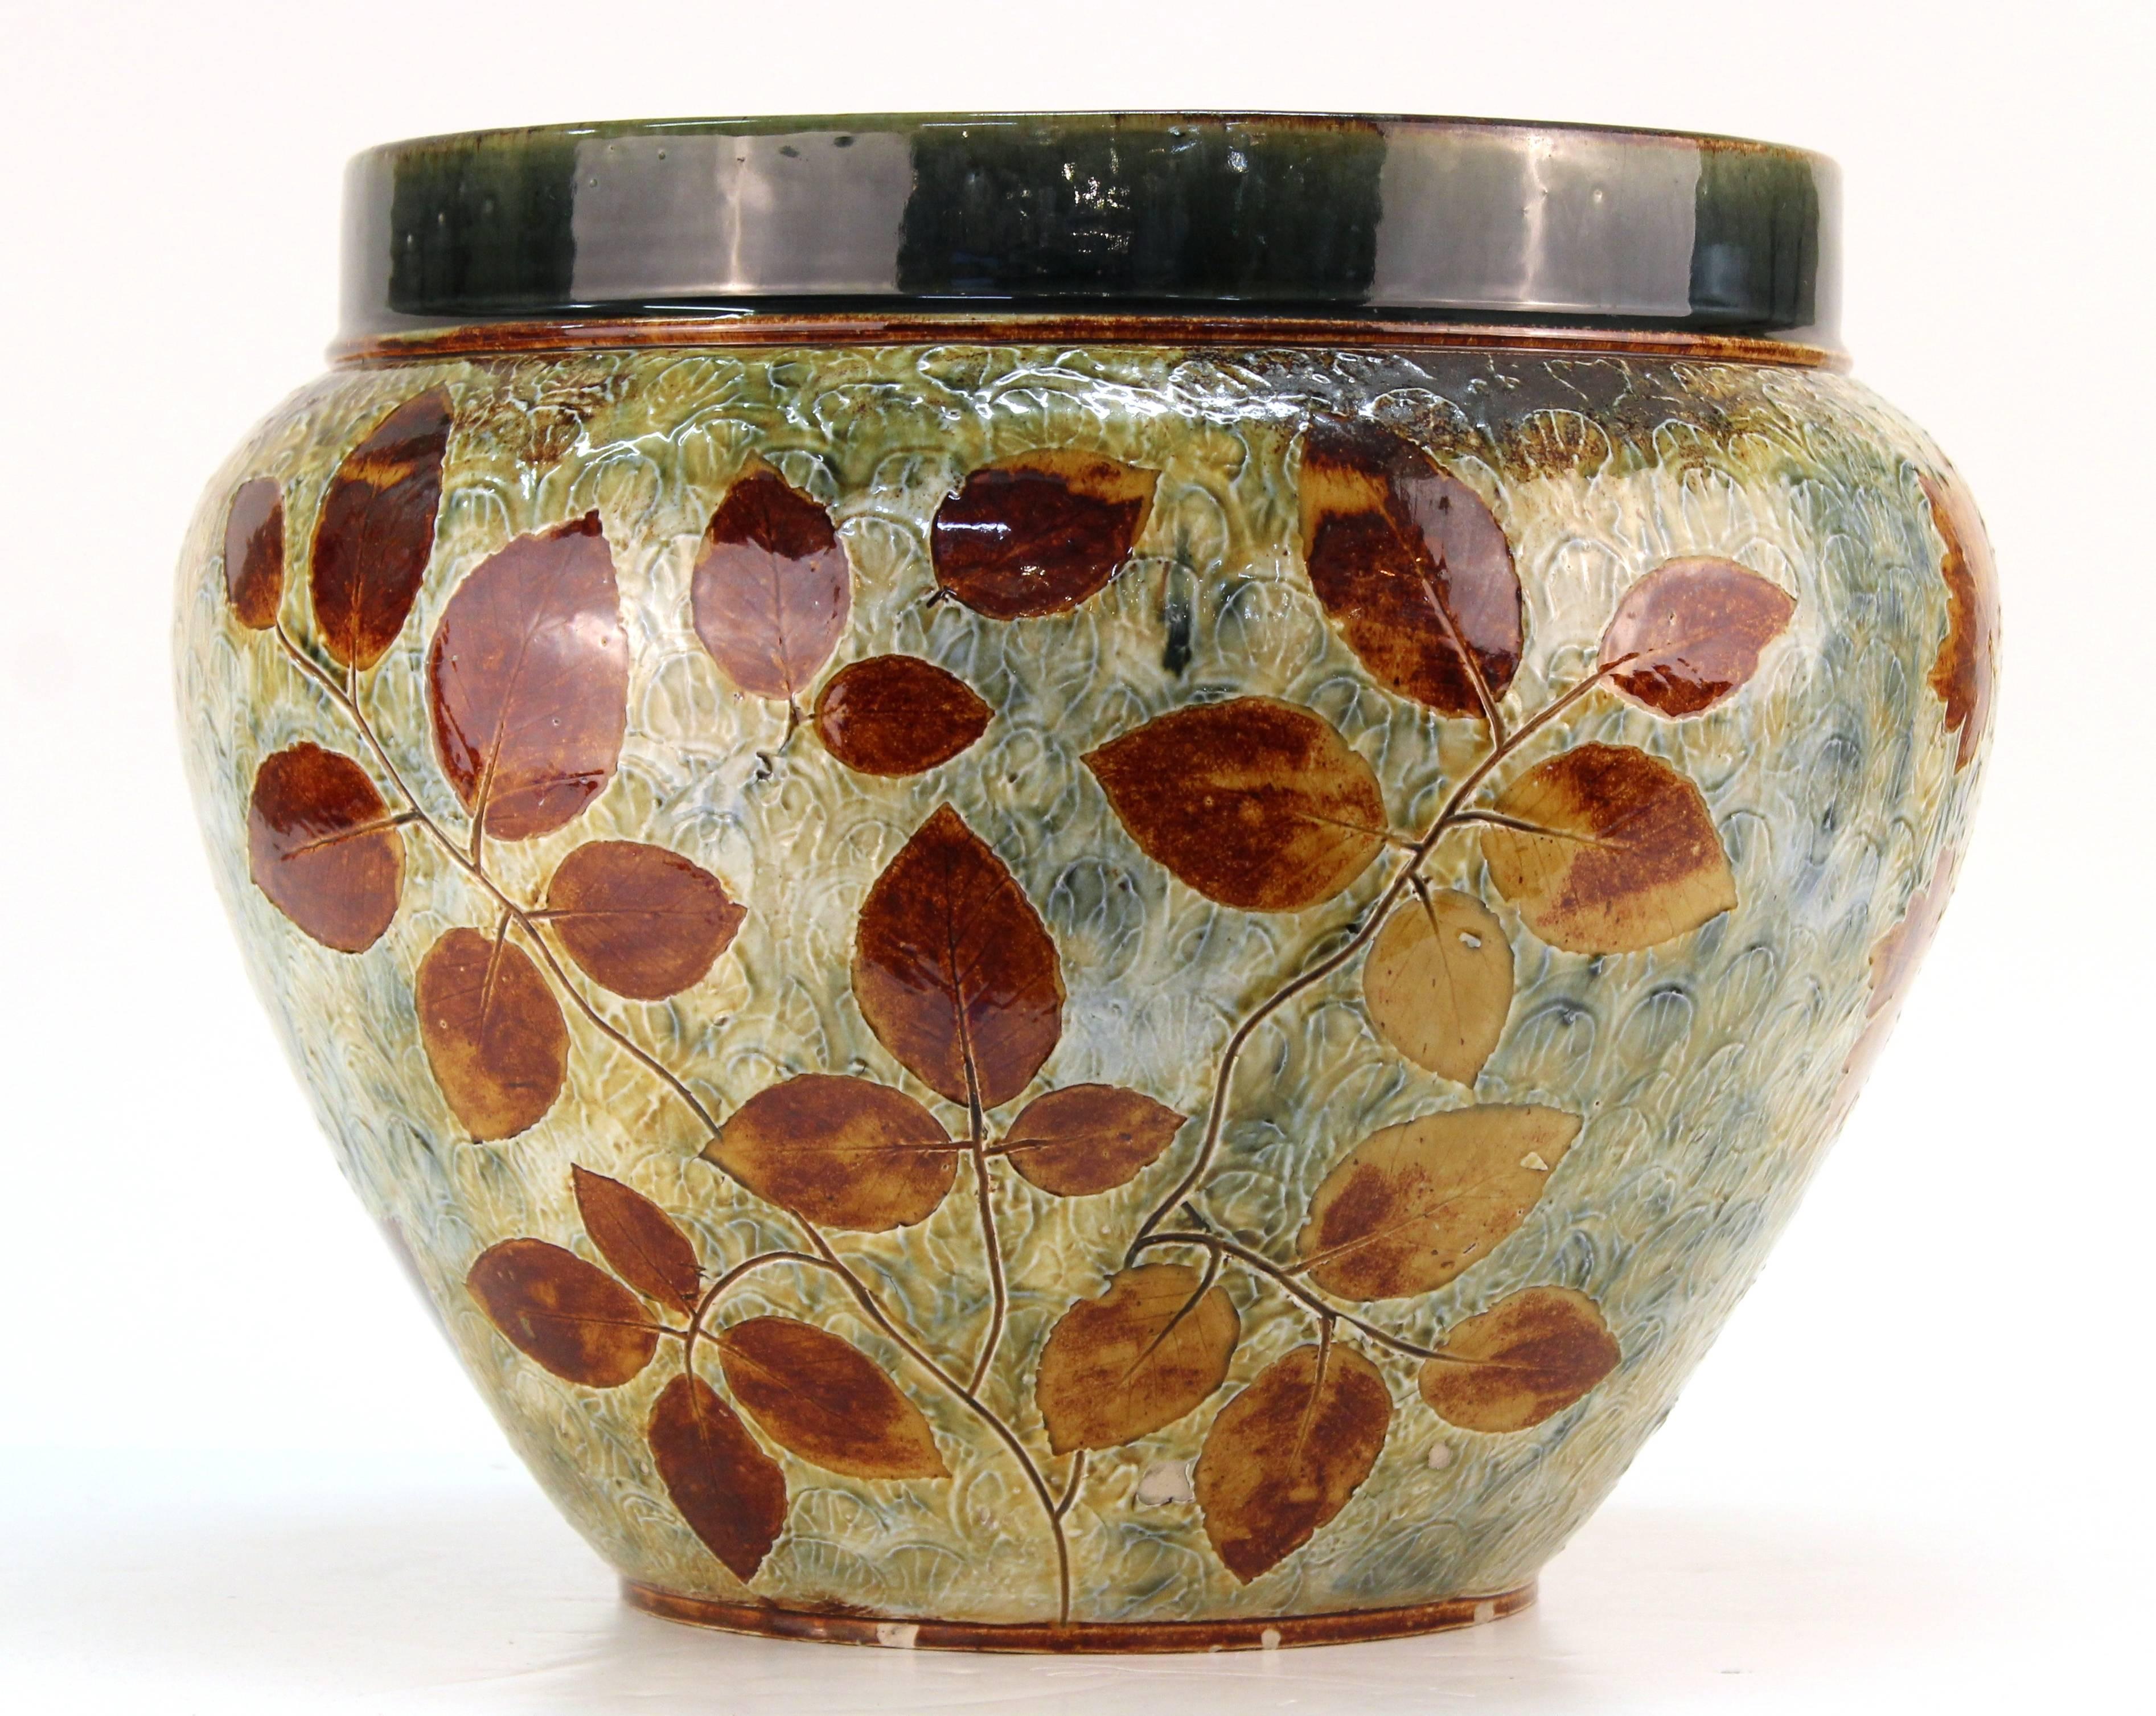 Large sized Doulton planter in a light green with reddish orange leaf motif. Three different types of leaves are featured, each on 1/3 of the exterior. There is also a dark green band around the top of the planter. Marked 